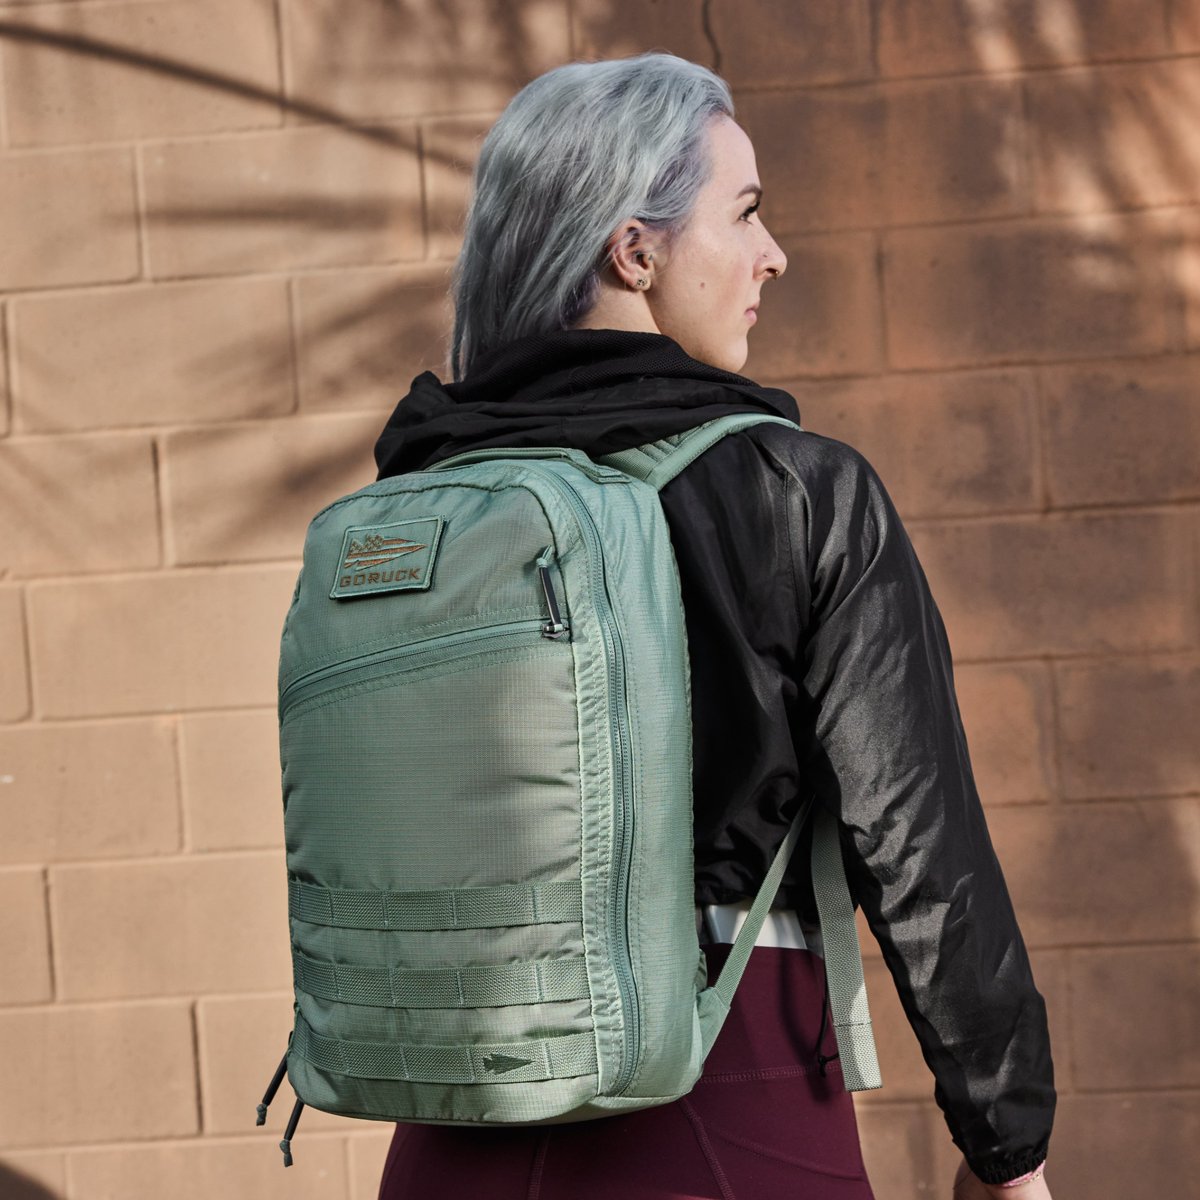 GoRuck G3 - Perfect for Carry On Bag • Edel Alon